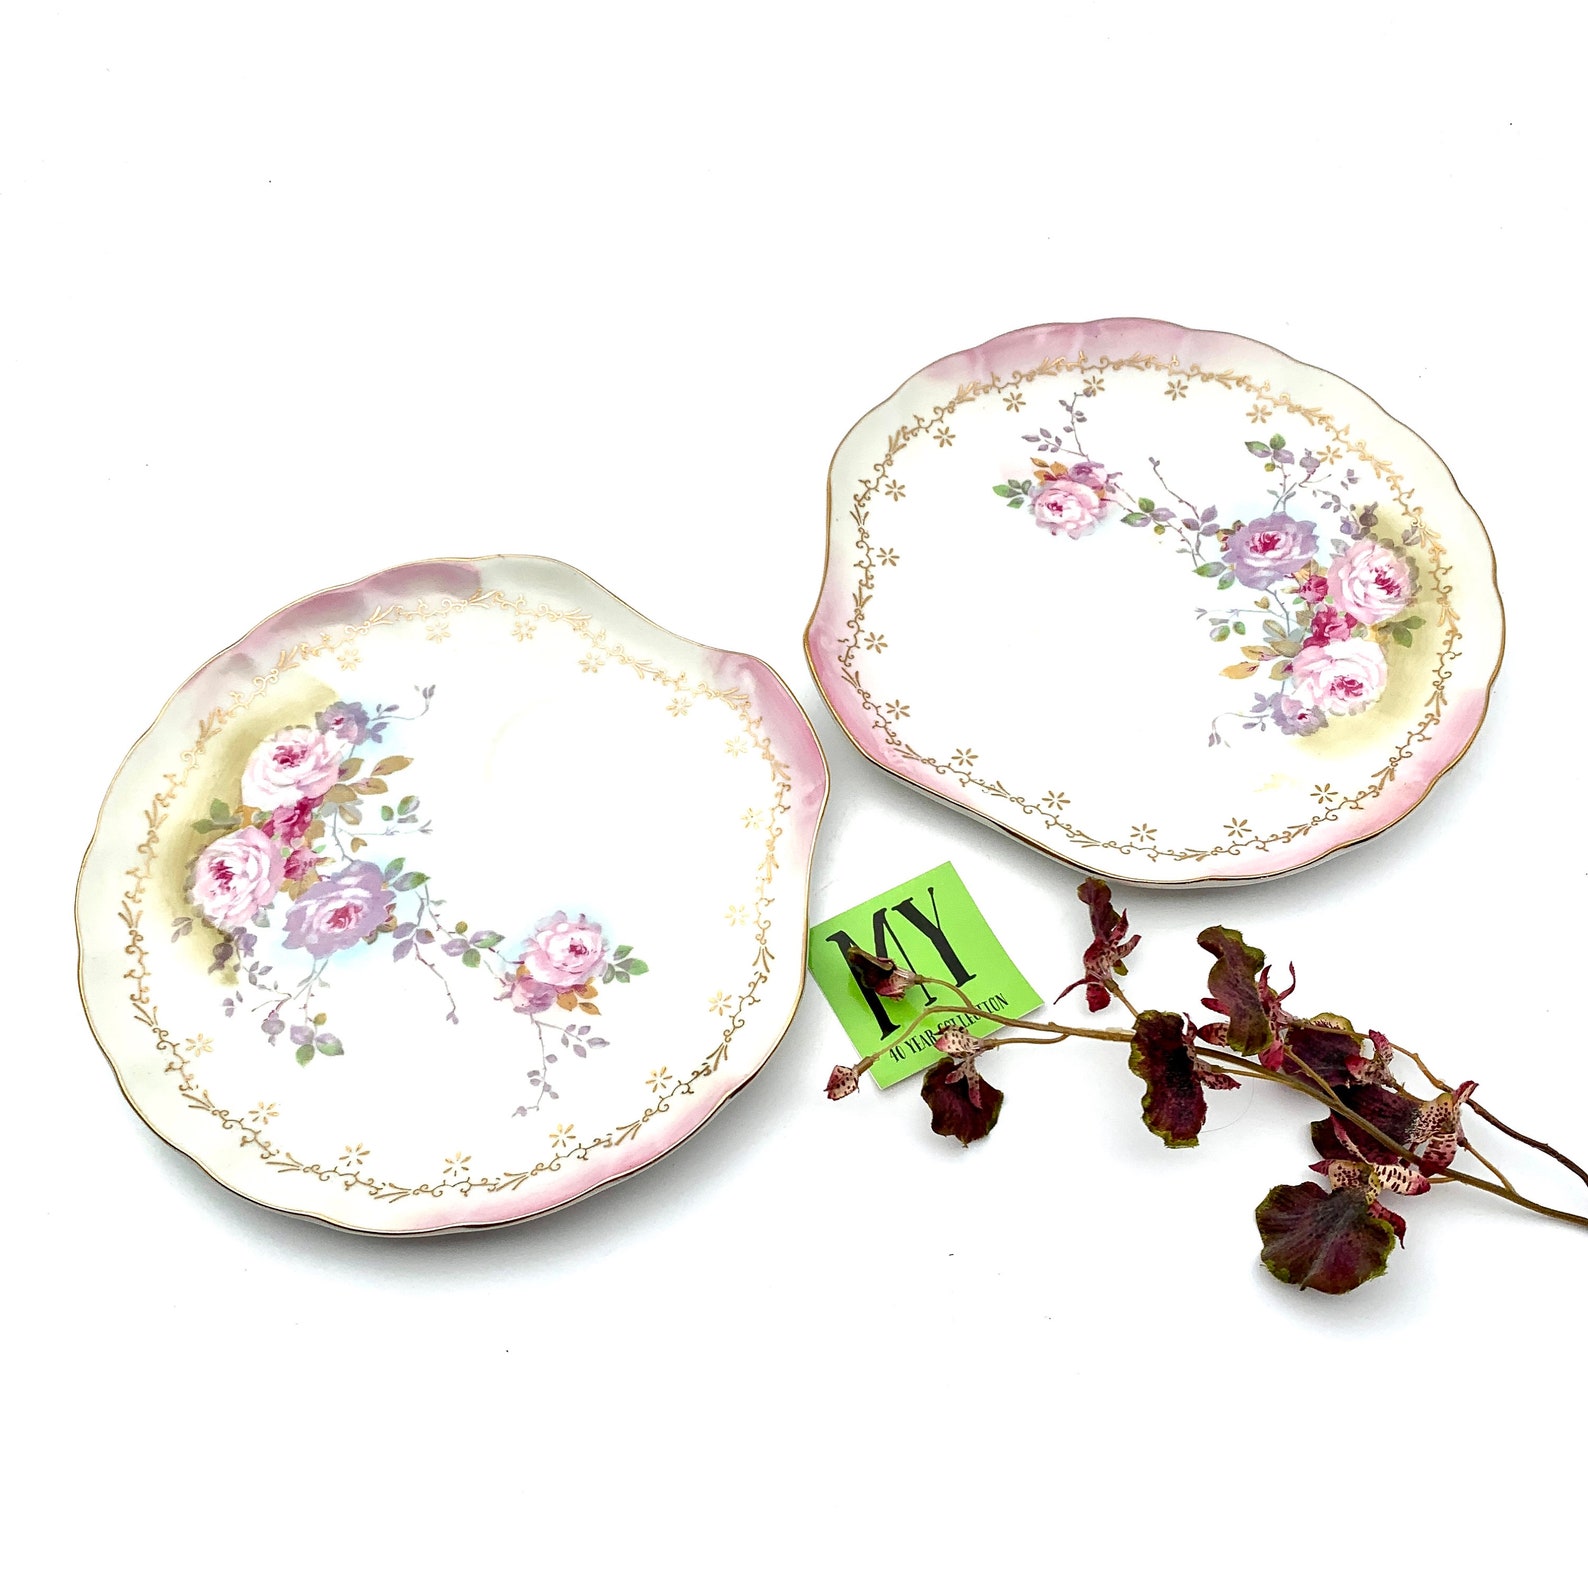 Antique Pair of KPM Japan Porcelain Jam and Jelly Underplate - Etsy